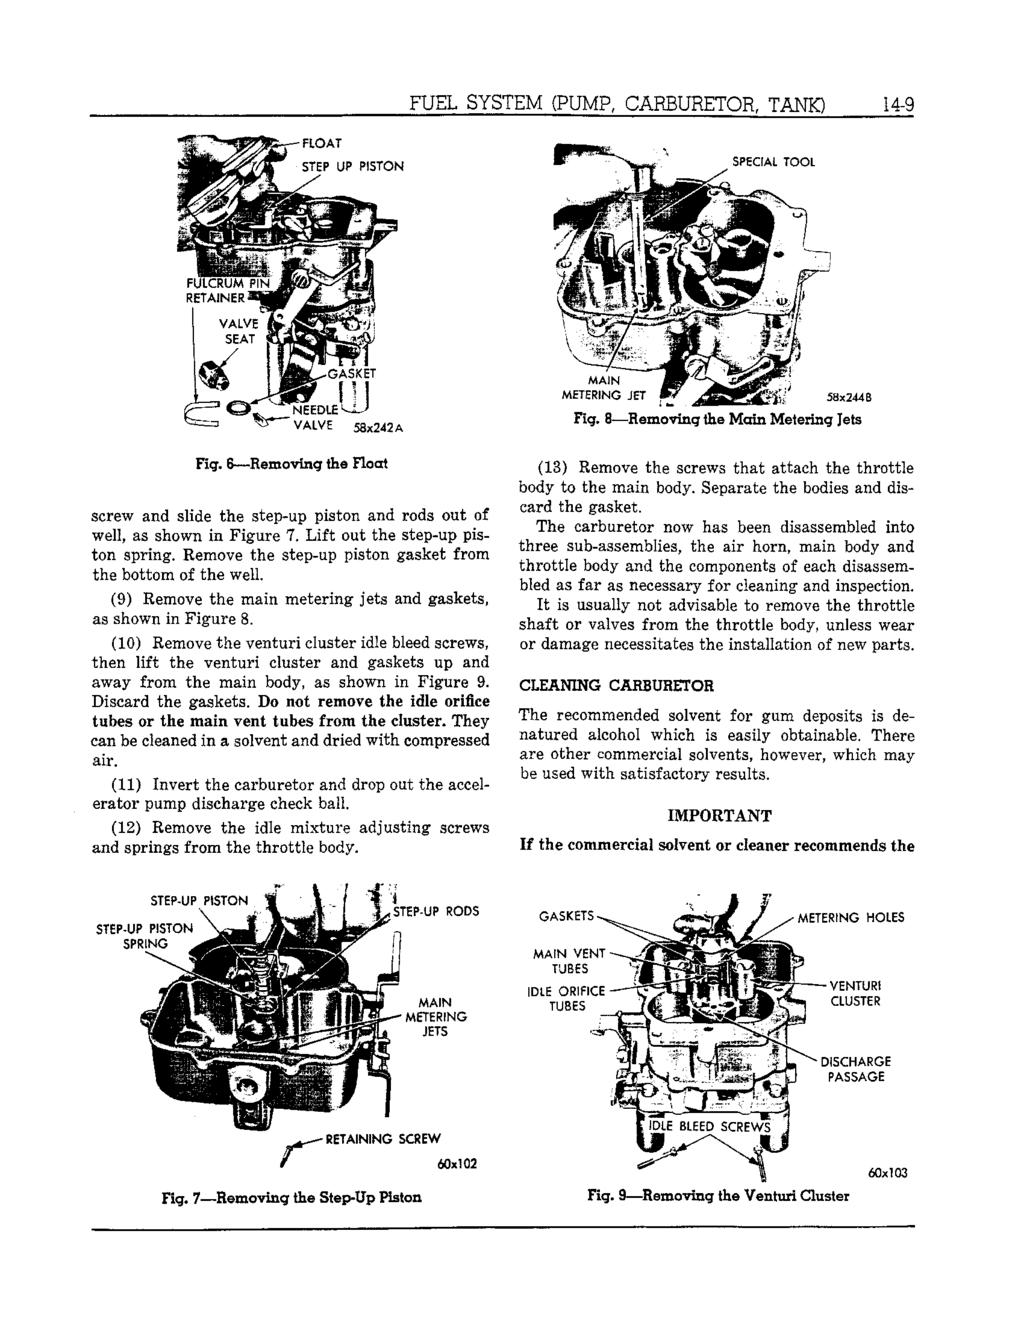 FUEL SYSTEM (PUMP, CARBURETOR, TANK) 143 Fig. 6 Removing the Float screw and slide the step-up piston and rods out of well, as shown in Figure 7. Lift out the step-up piston spring.